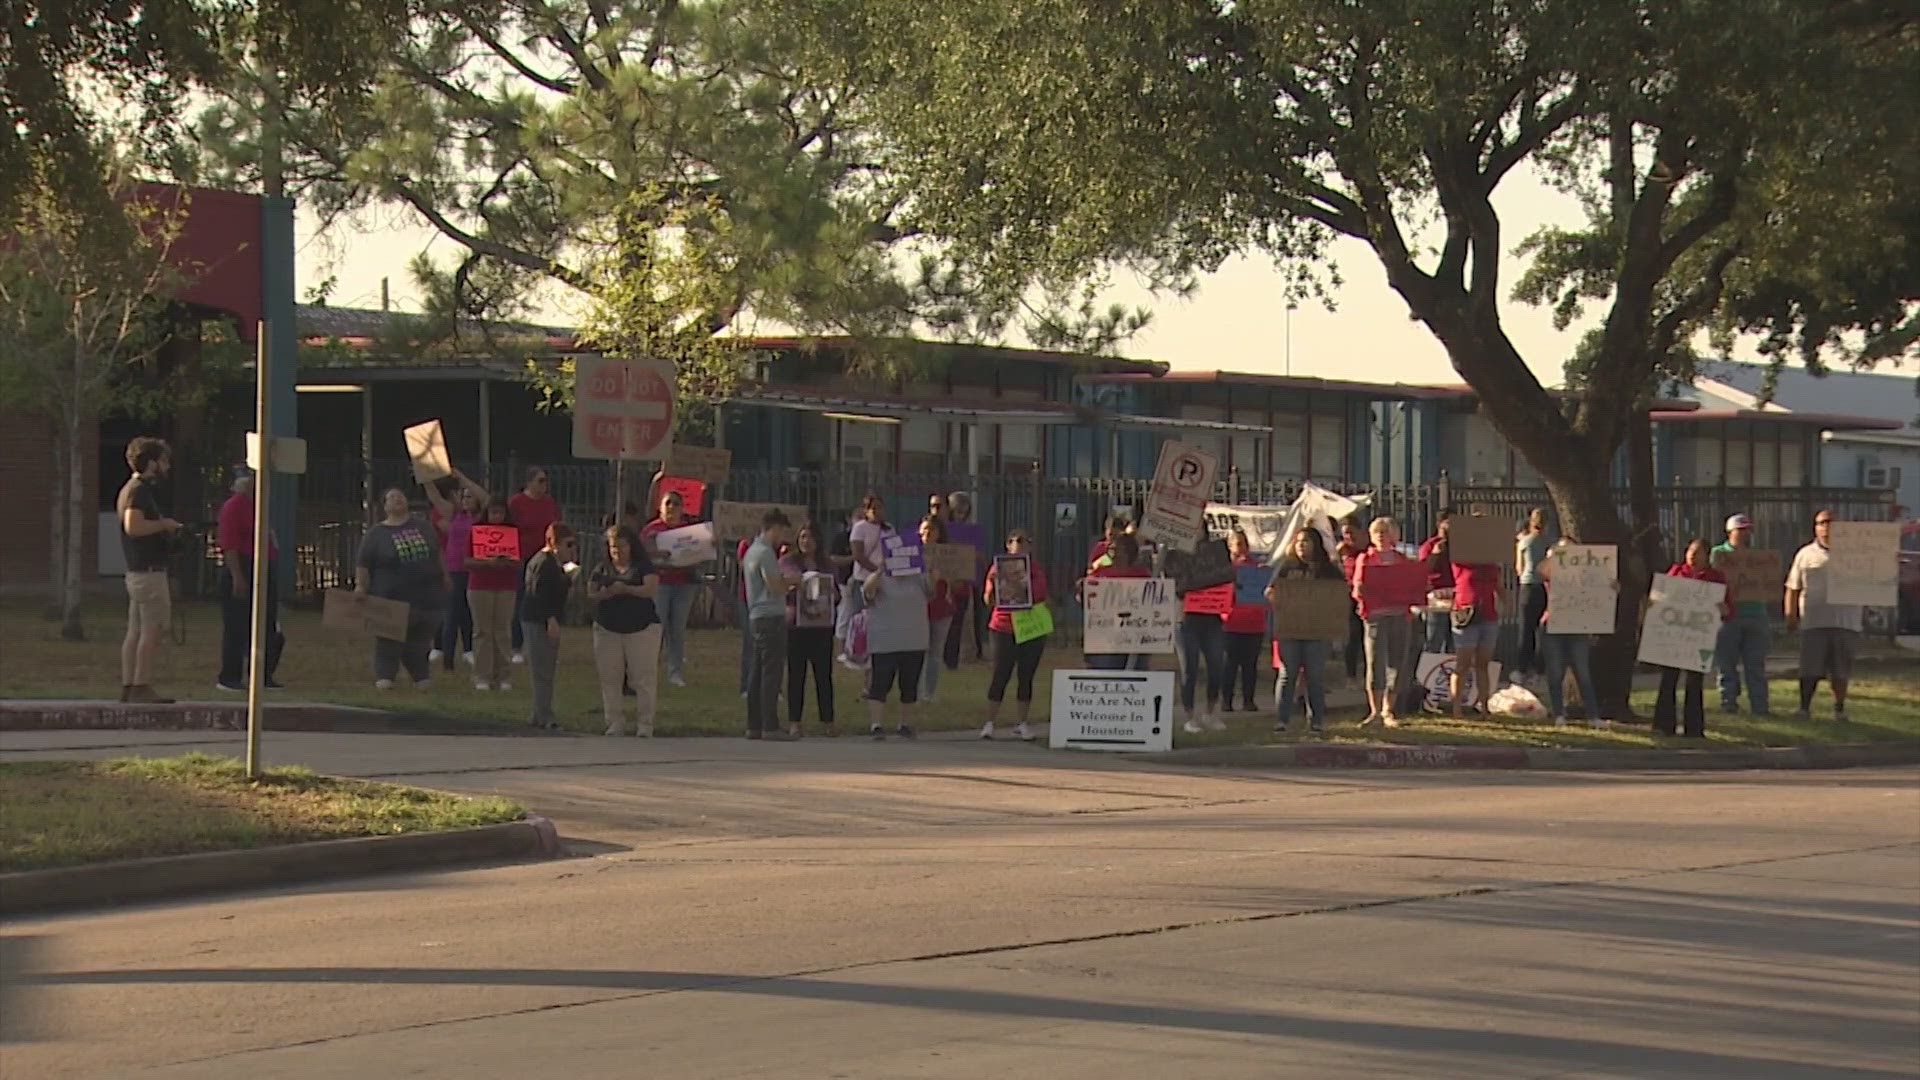 The parents protested outside Cage Elementary and Project Chrysalis Middle School in support of a fired teacher and other staff members.